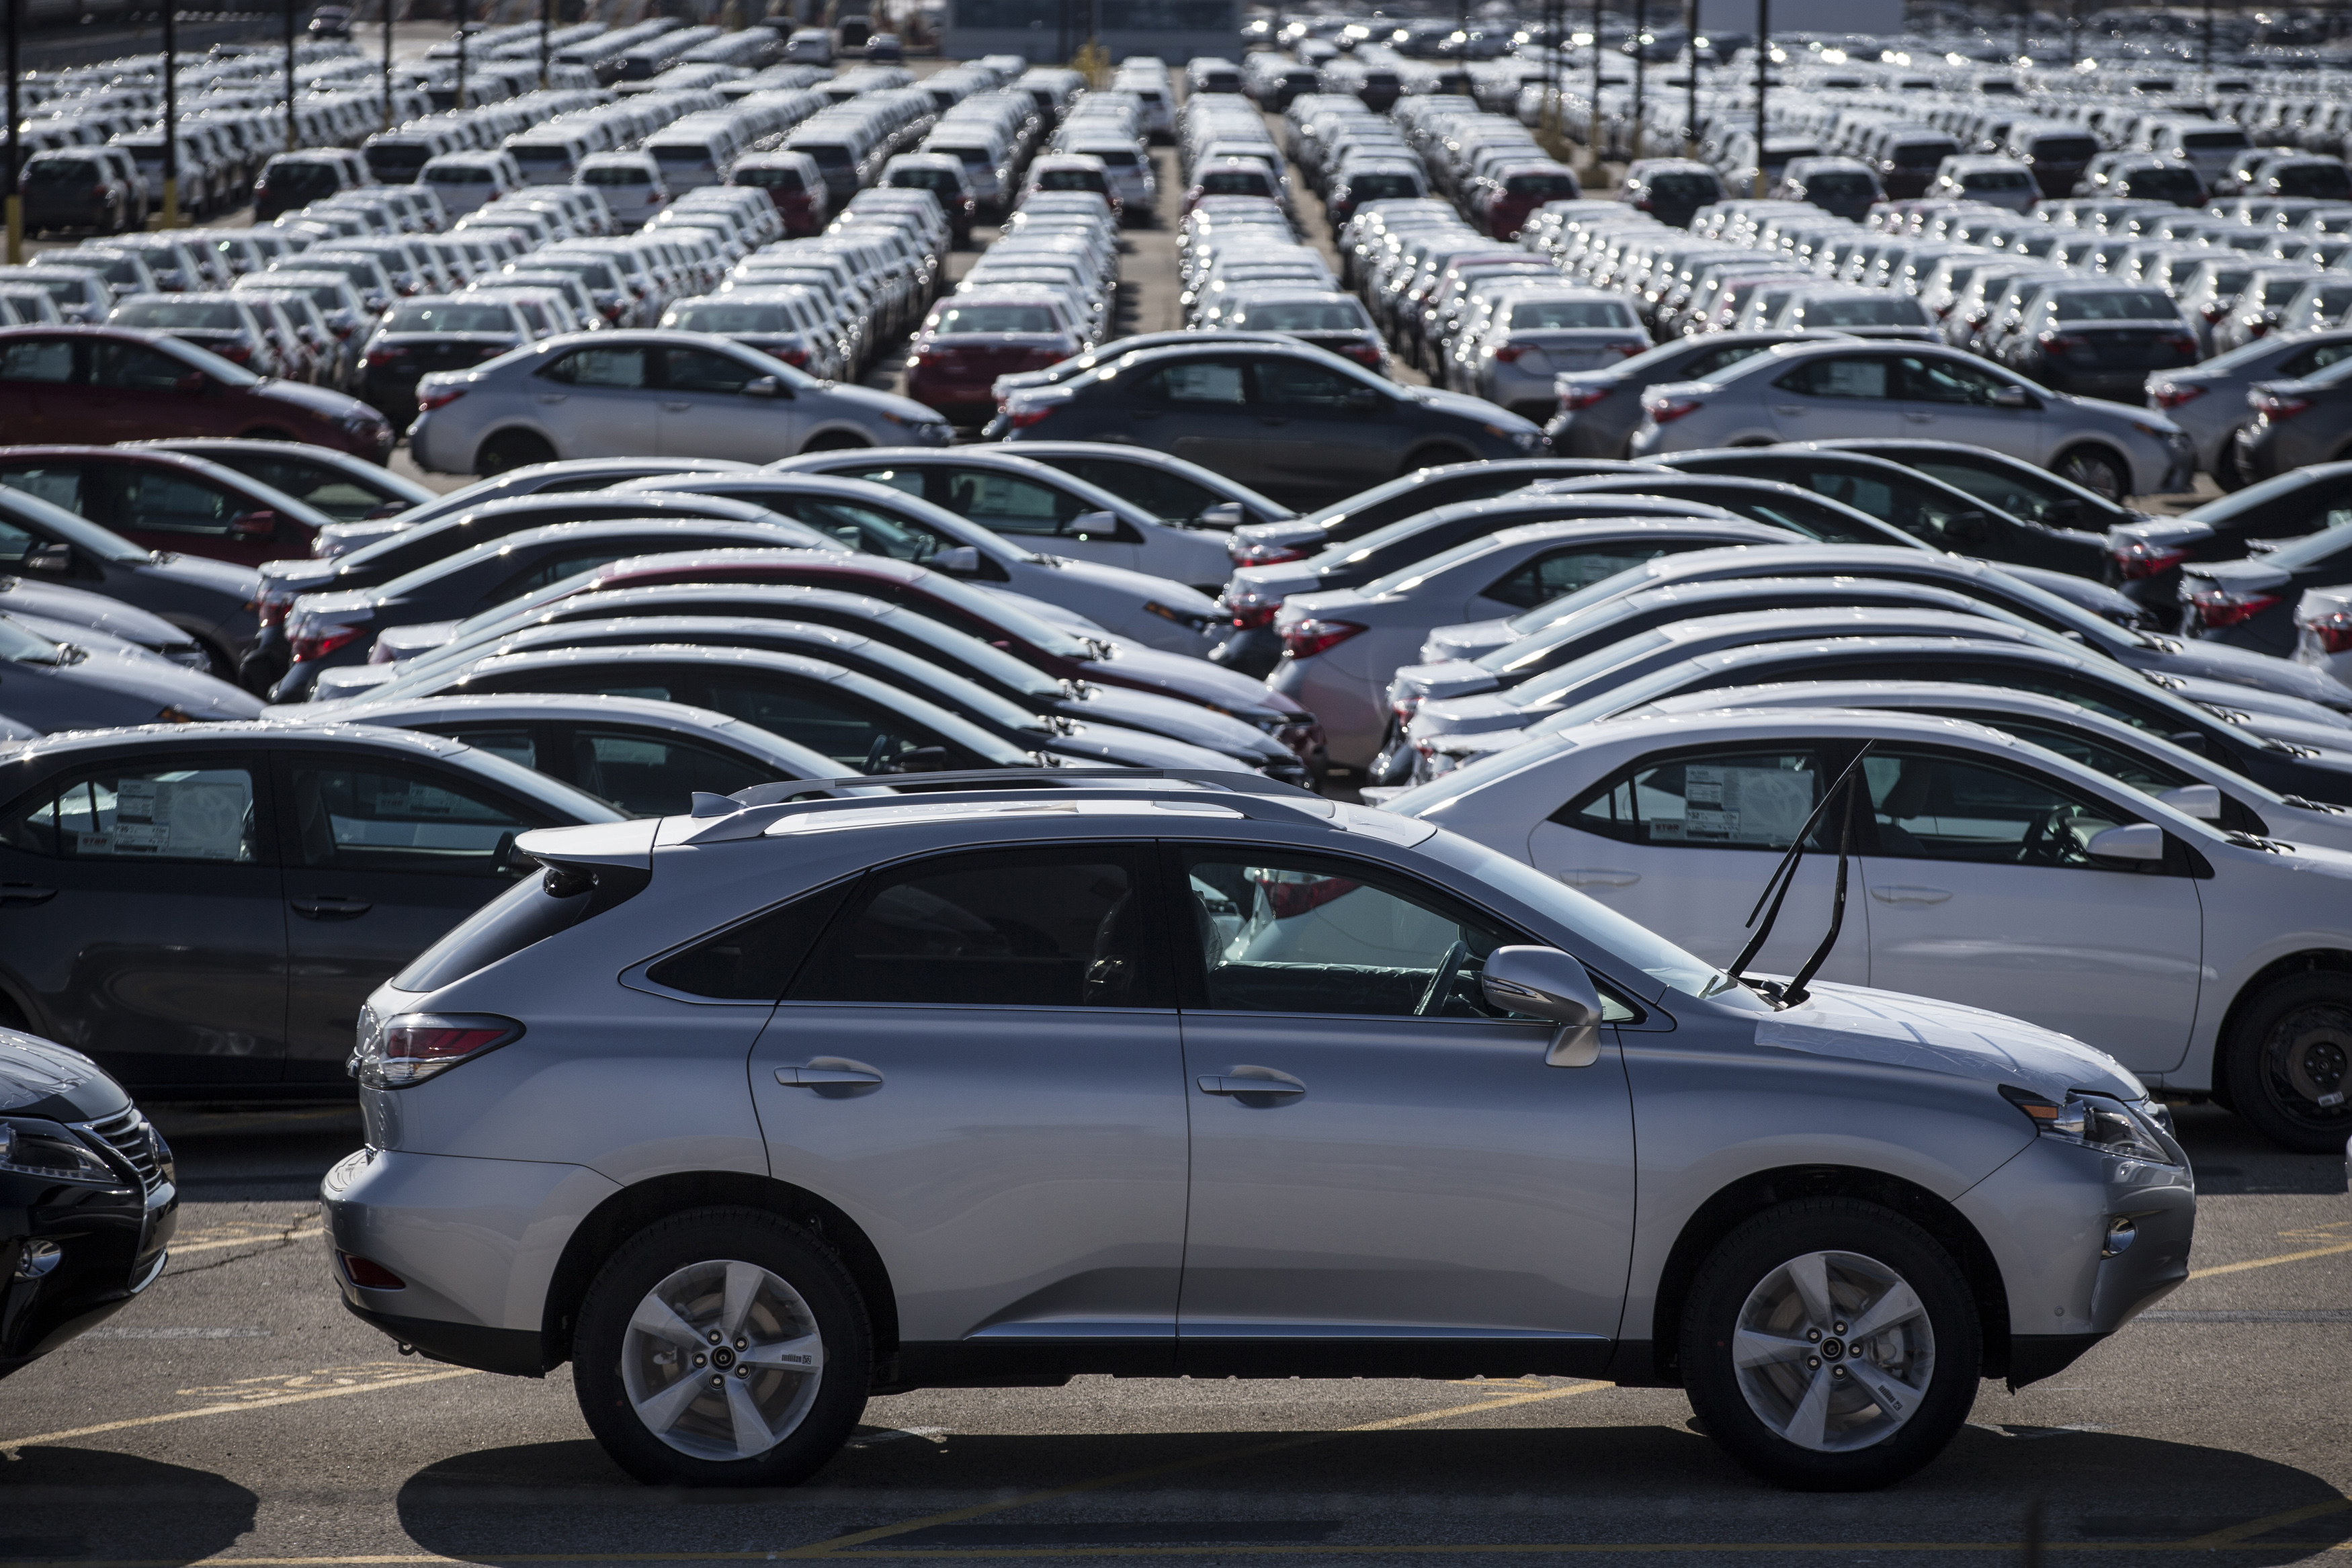 New cars are seen at the Toyota plant in Cambridge